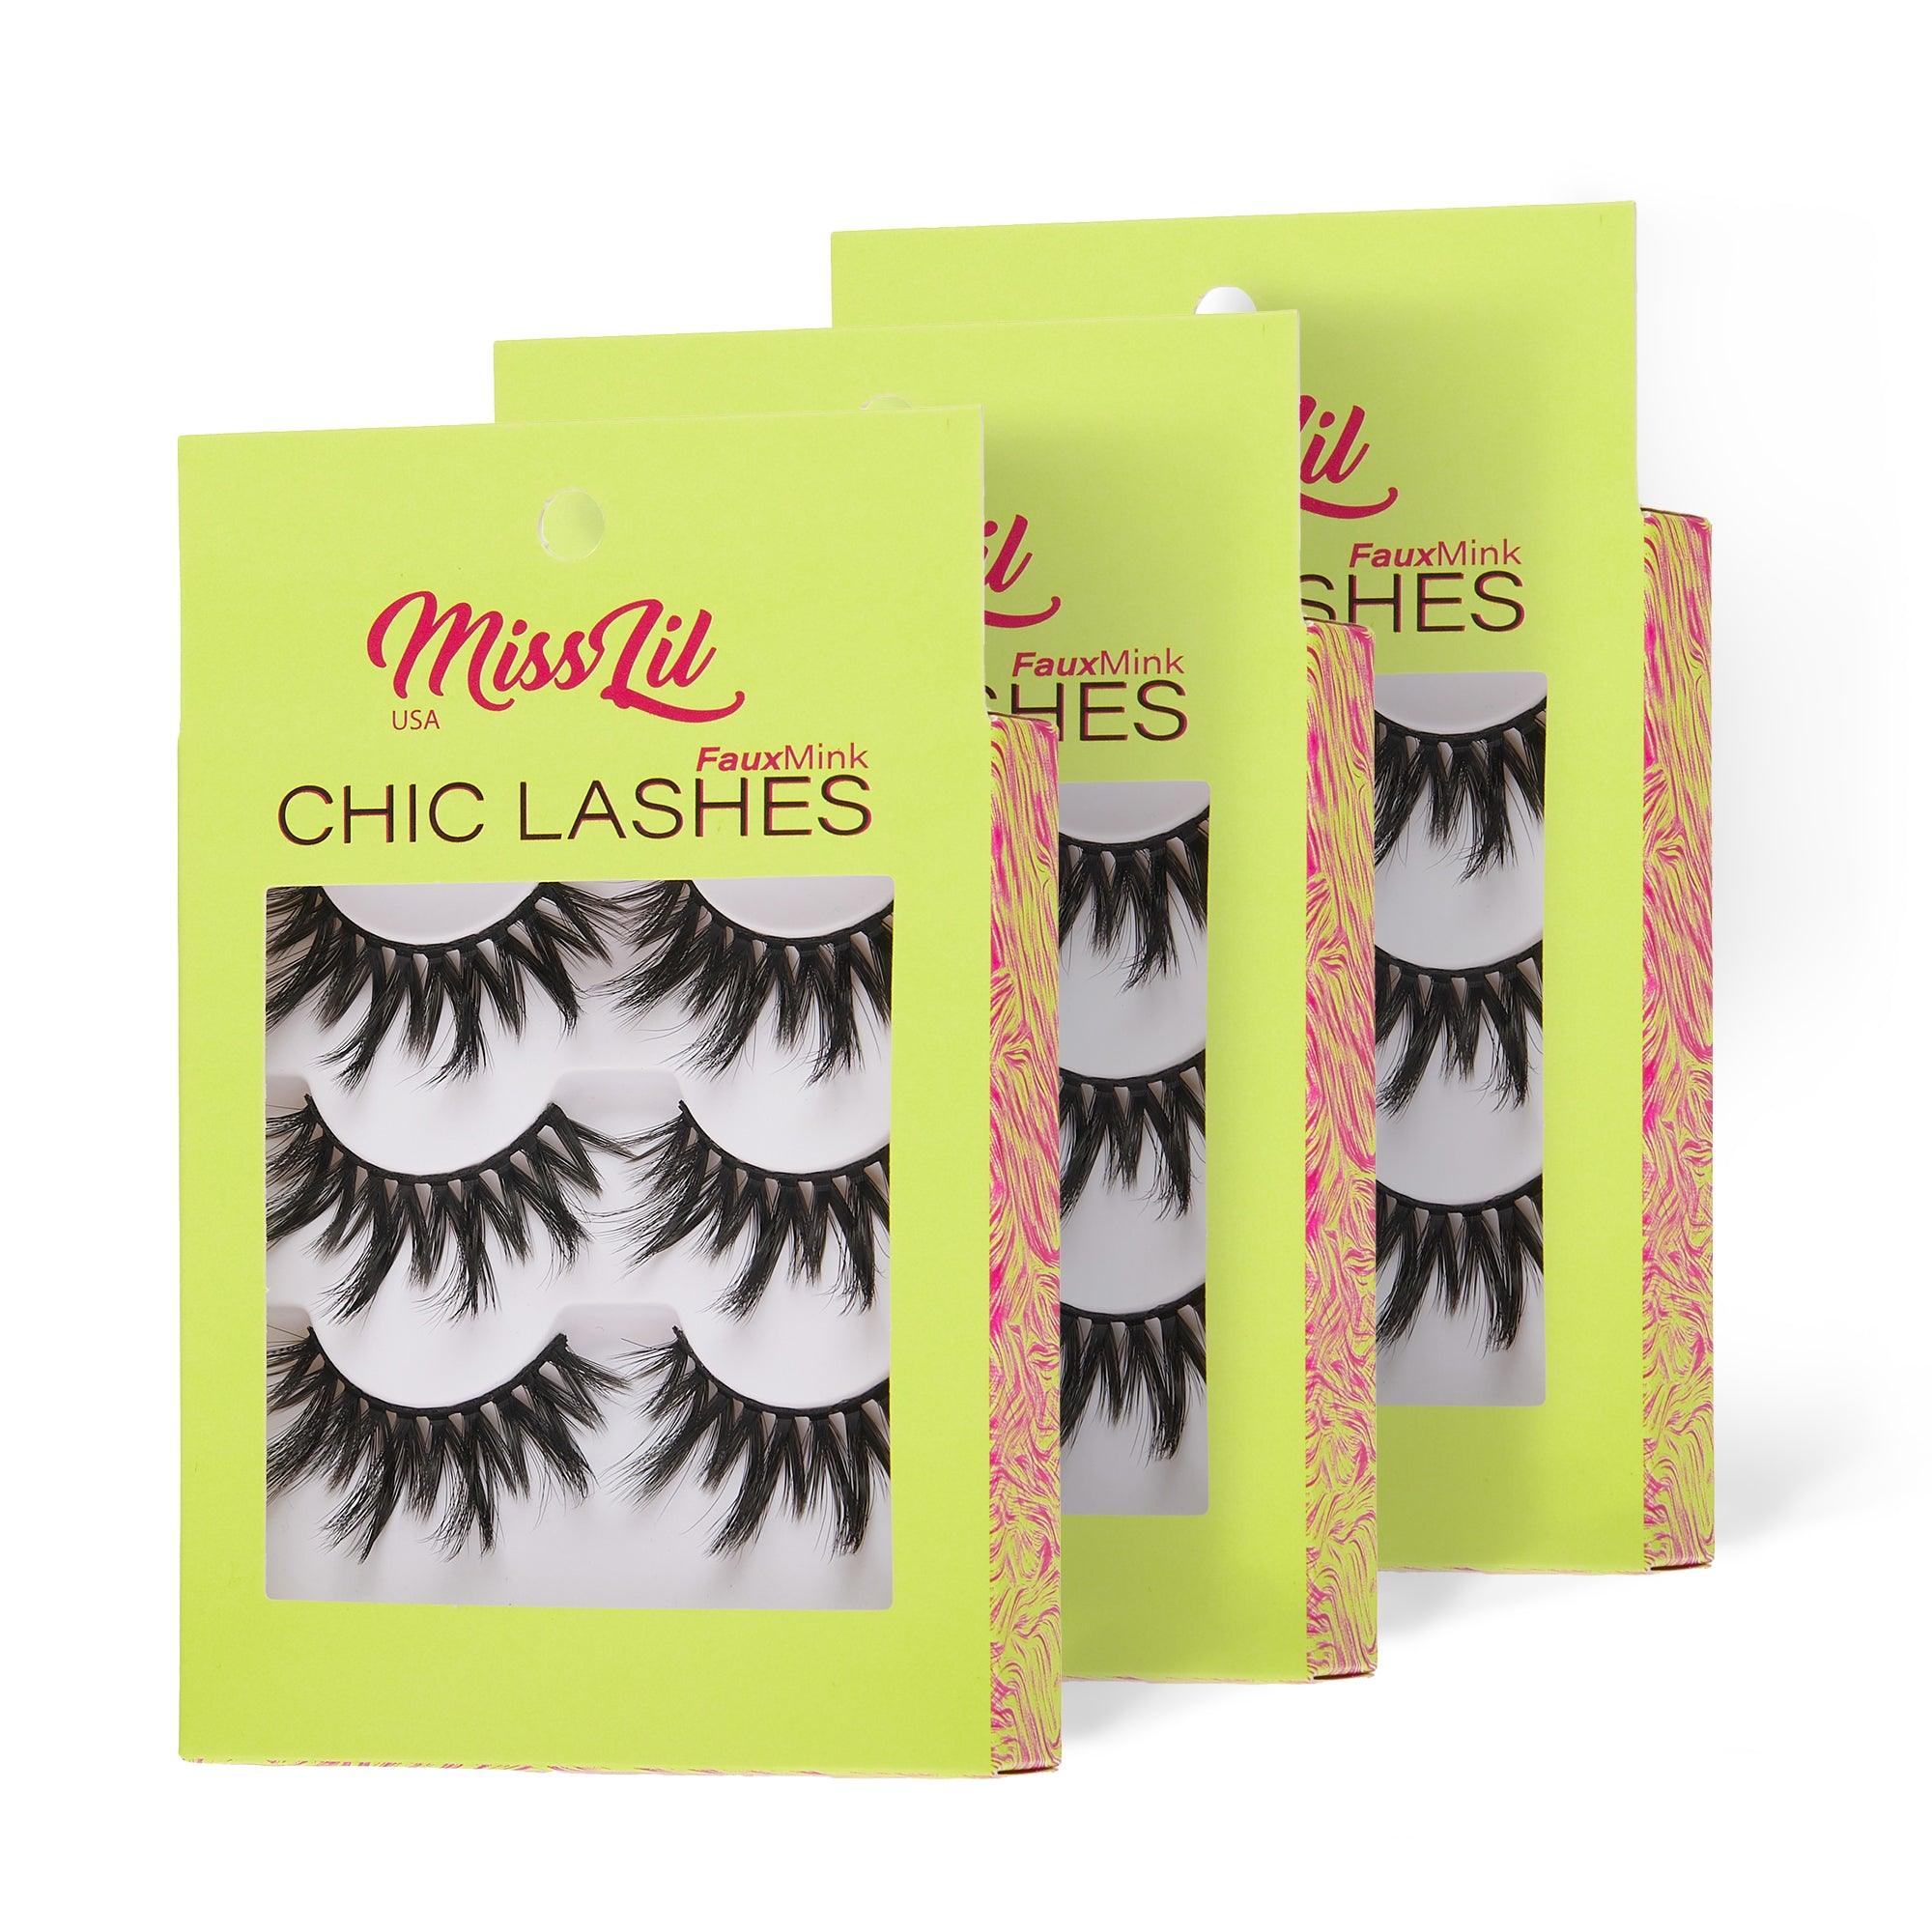 3-Pairs Lashes-Chic Lashes Collection #20 (Pack of 12) - Miss Lil USA Wholesale